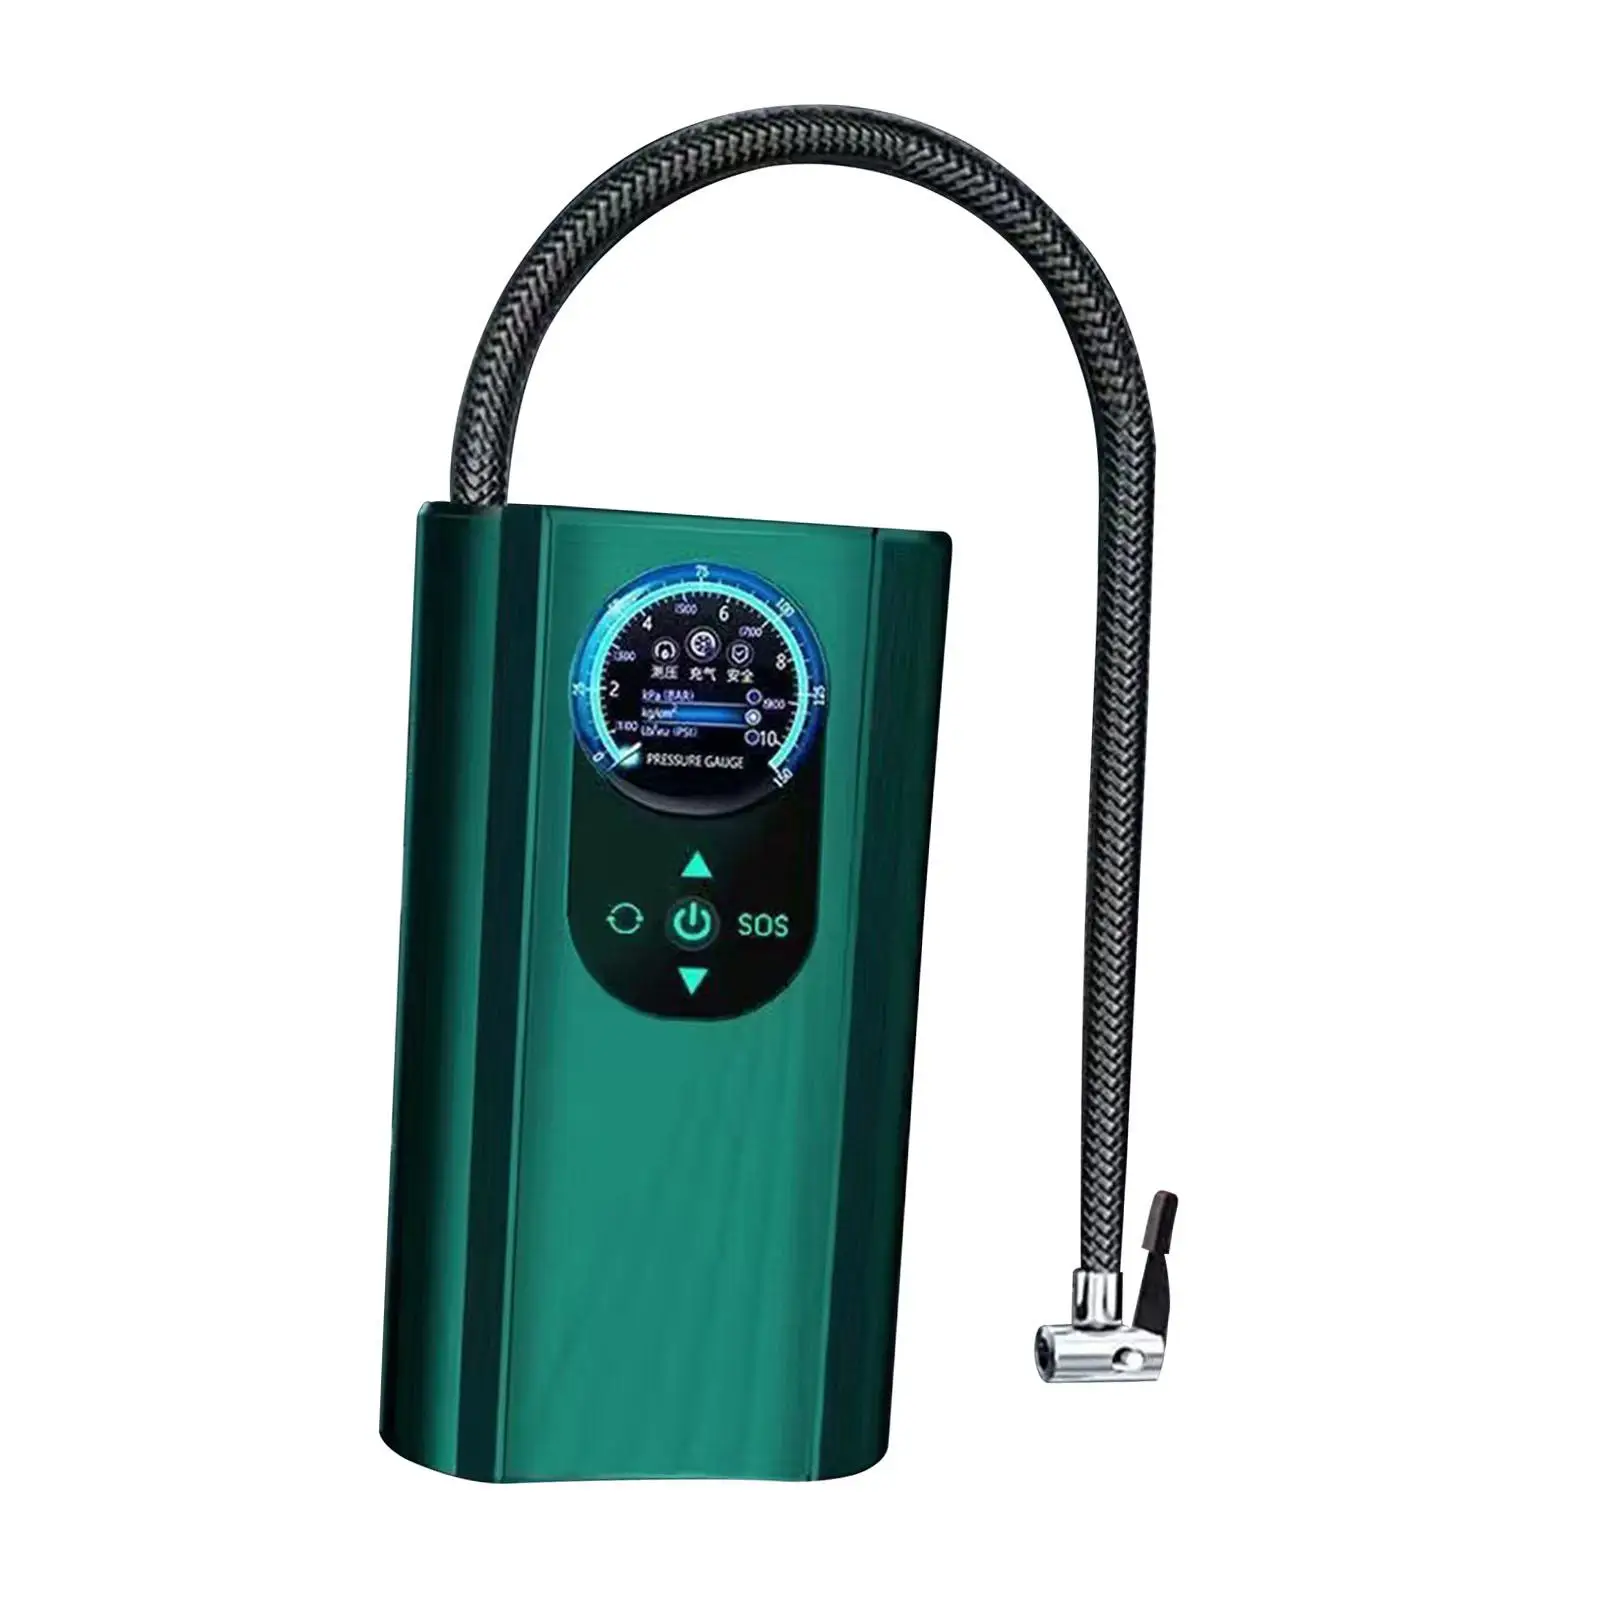 Portable Air Compressor Auto Accessories DC 12V with Tire Pressure Gauge Compact Air Pump for Bike Ball SUV Motorcycle Car